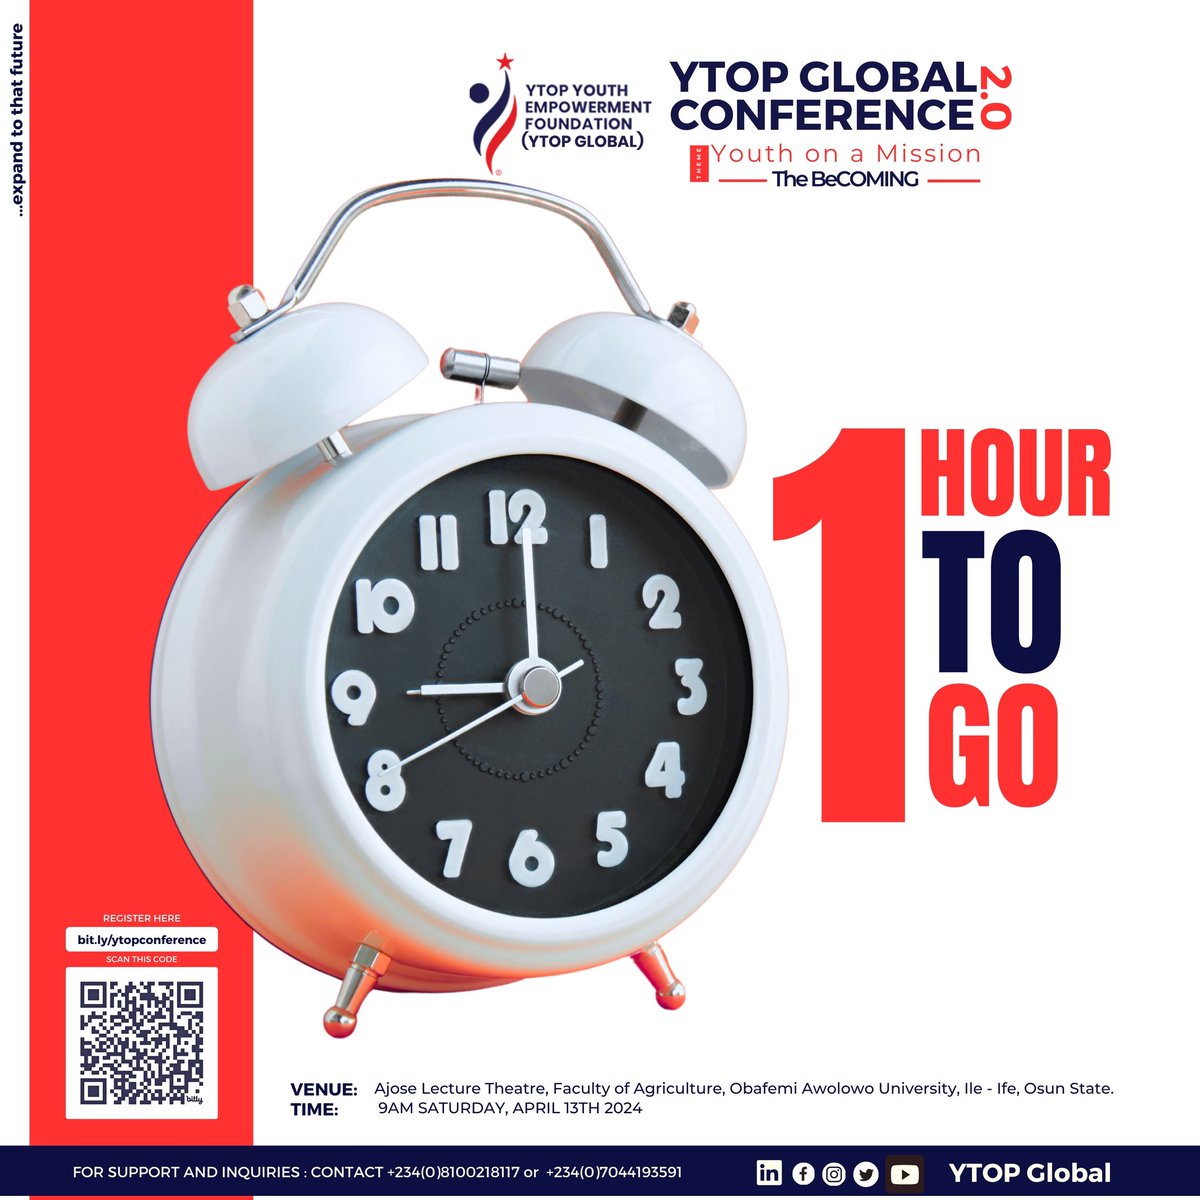 1 hour to go

#YouthonAMission 
#beCOMING2024

32 universities in a location
7 countries coming together

YTOP Global 
...expand to that future

#iamytop #ytopglobal #GlobalChangeMaker #beCOMING2024 #sdgs2030 #youthleadership #youthinaction #PositiveImpact #partnership